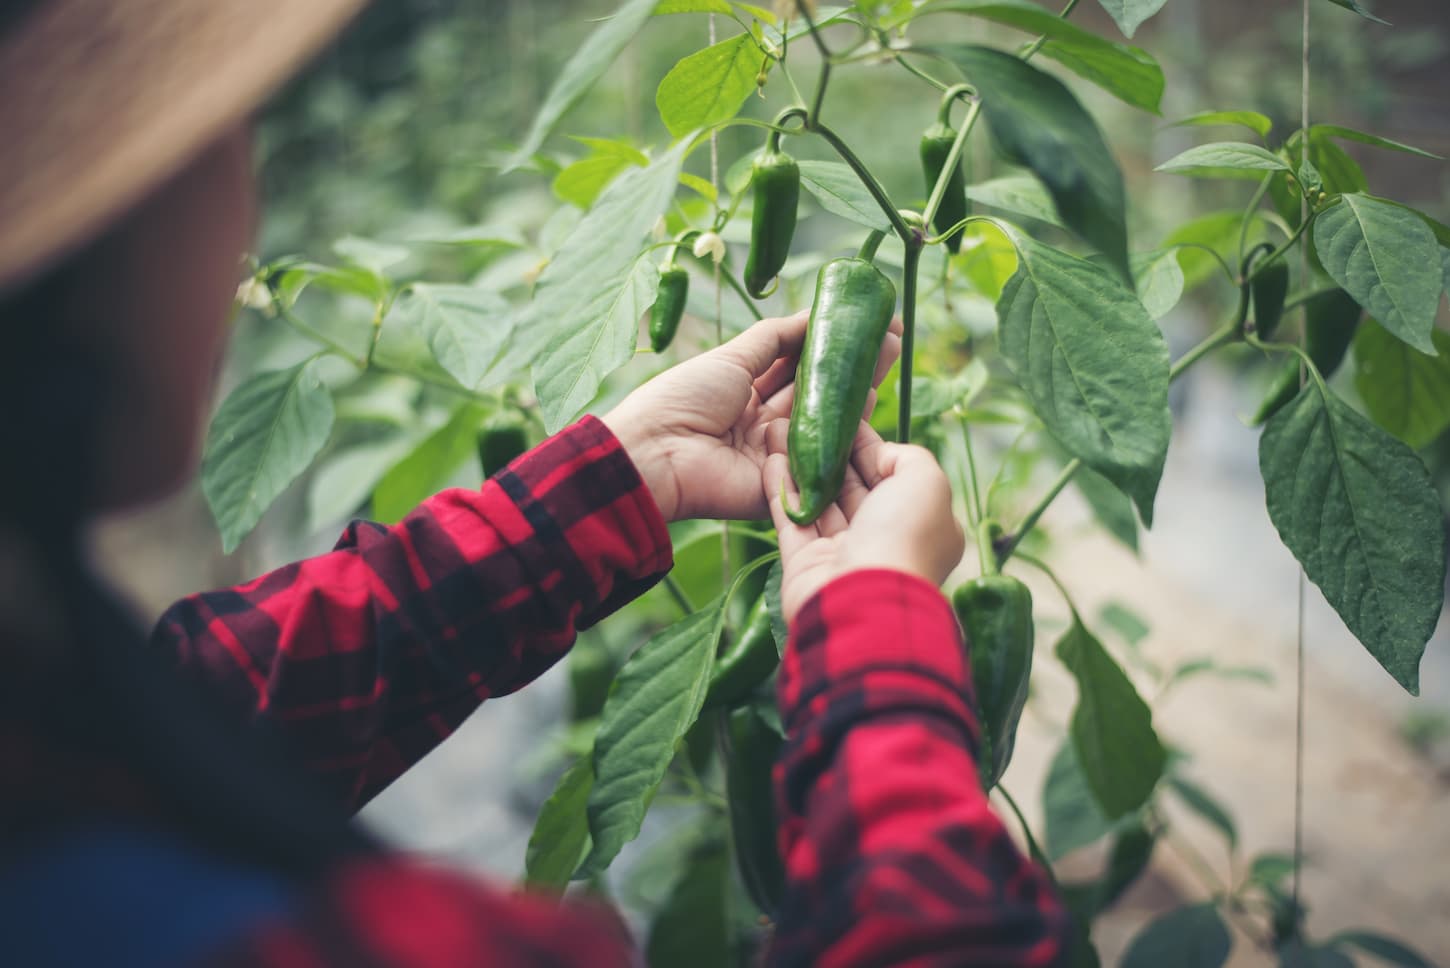 An image of a woman farmer hand-keeping chili pepper plant in the garden.